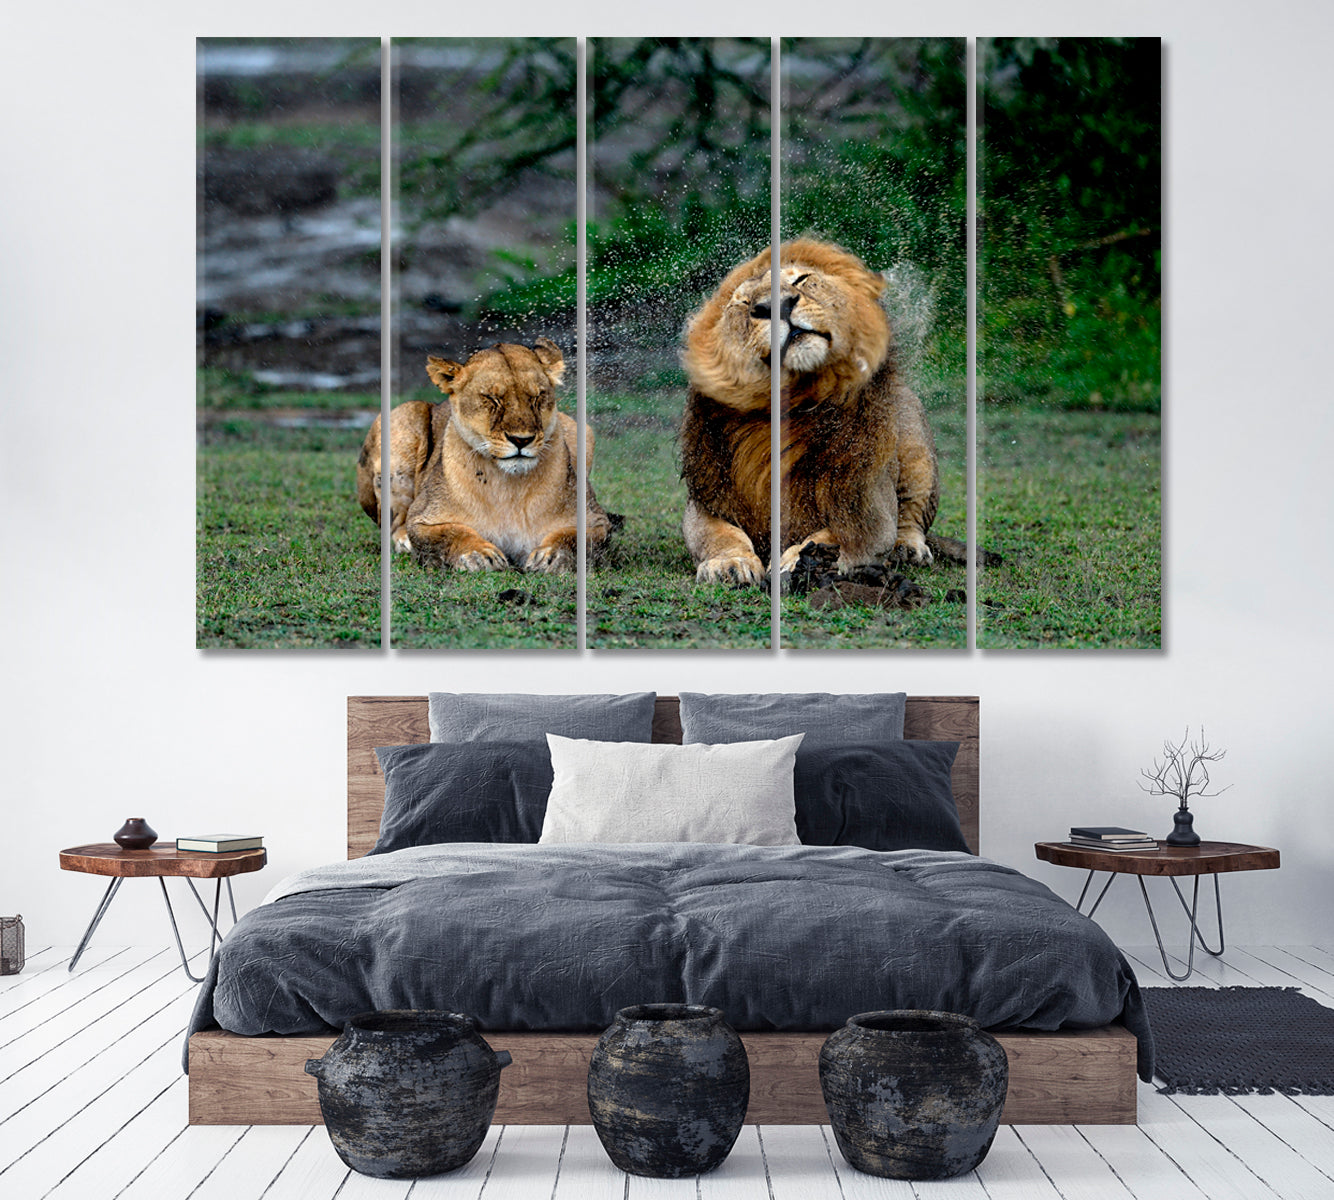 Lions under Rain in Ngorongoro Conservation Area Tanzania Canvas Print ArtLexy 5 Panels 36"x24" inches 